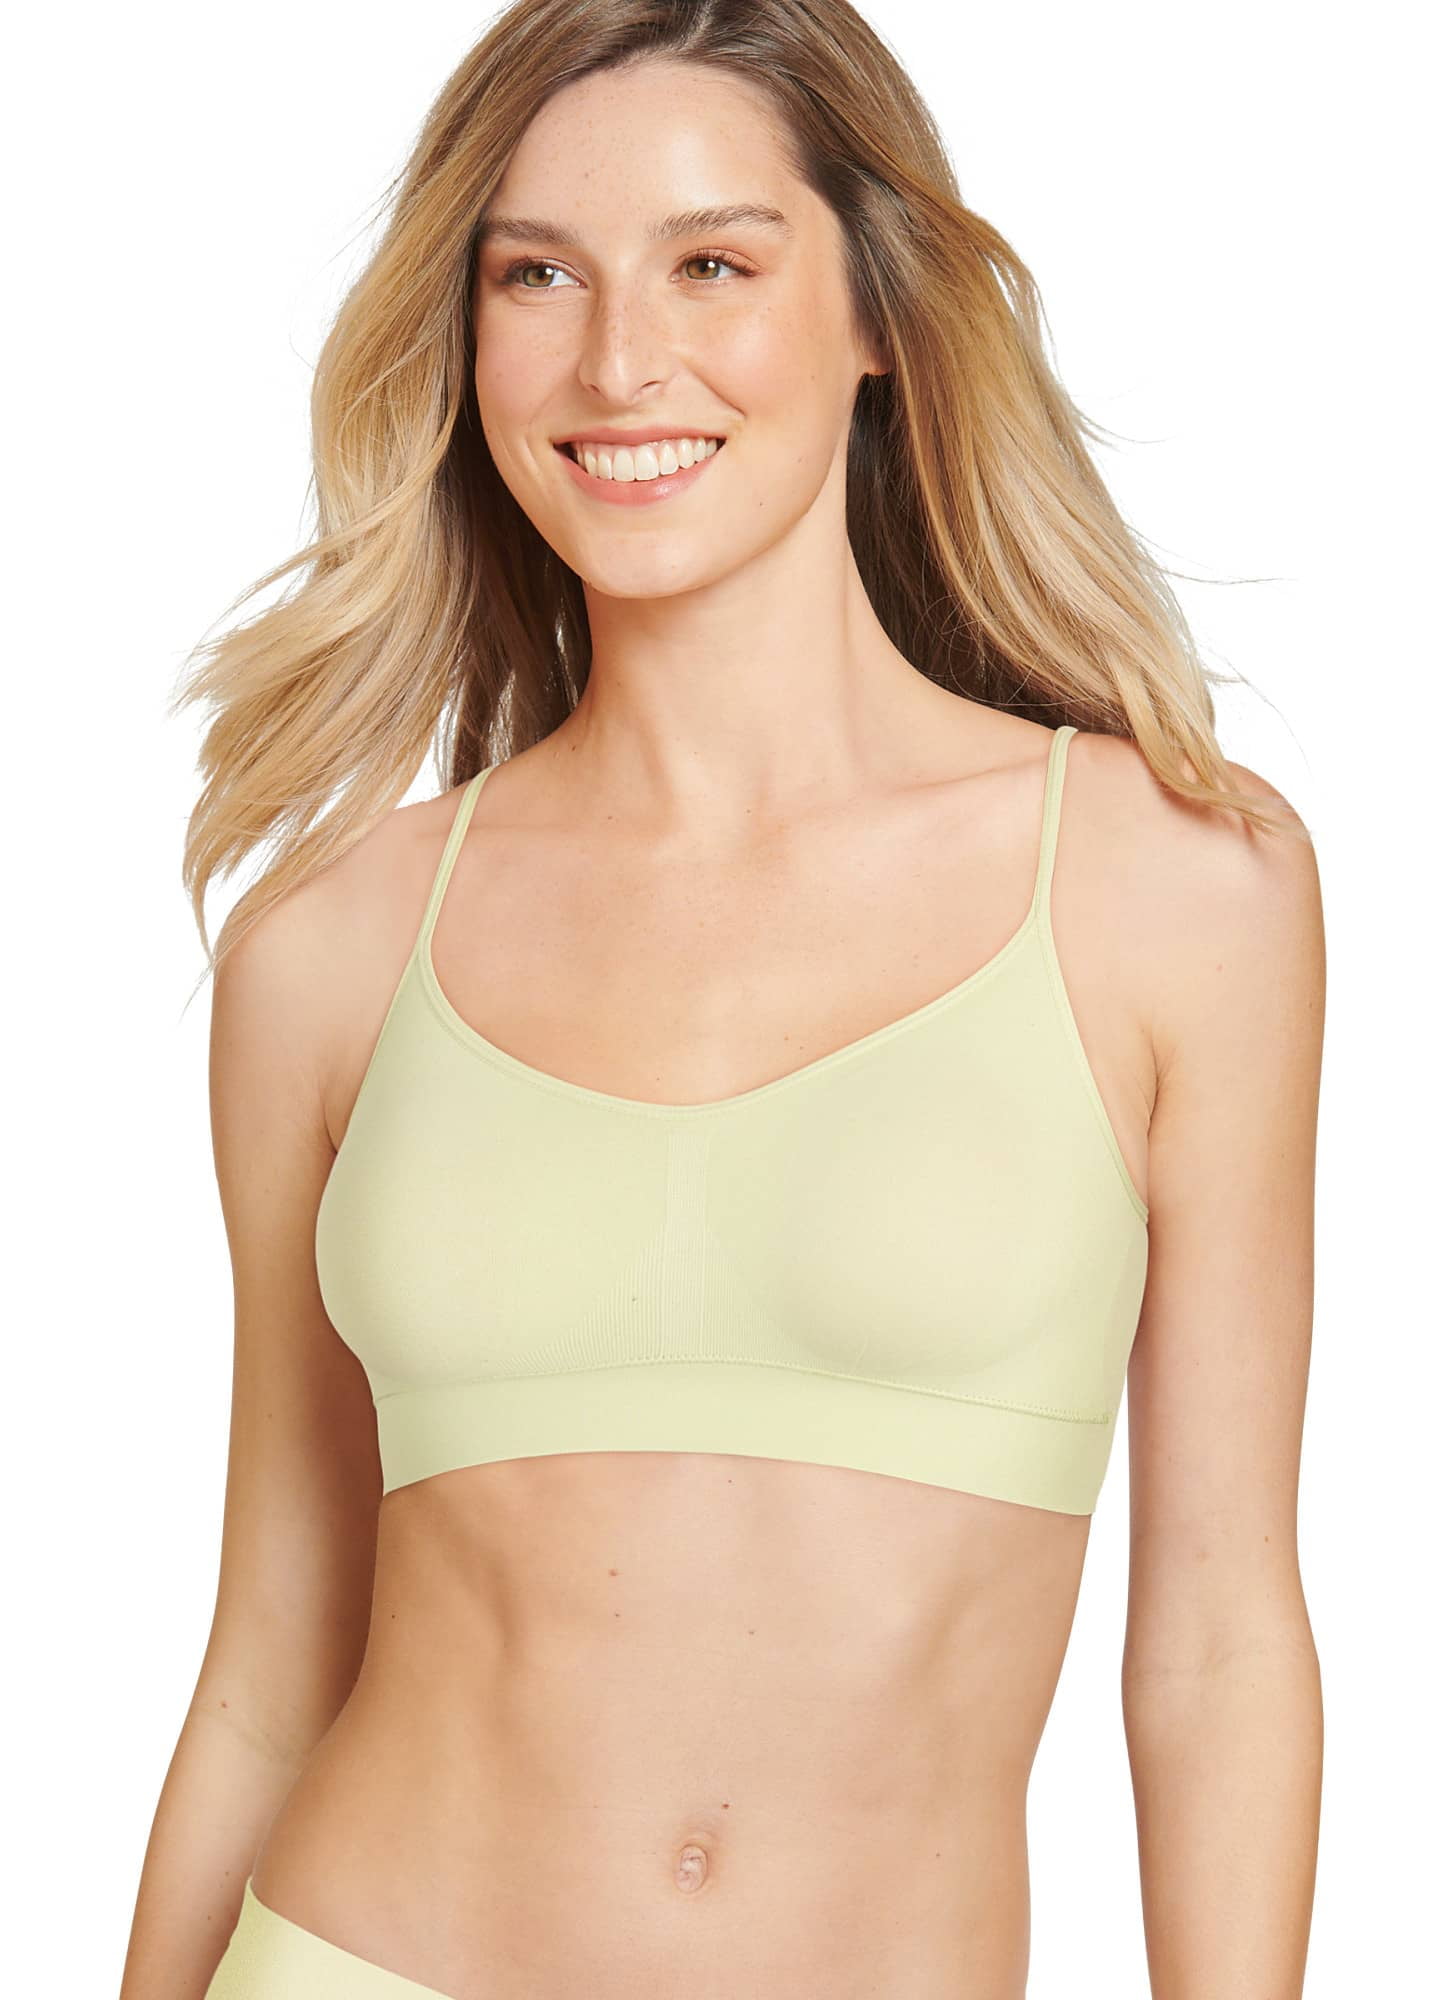 CWCWFHZH Womens Knit Cami Bralette Wirefree Padded Medium Support